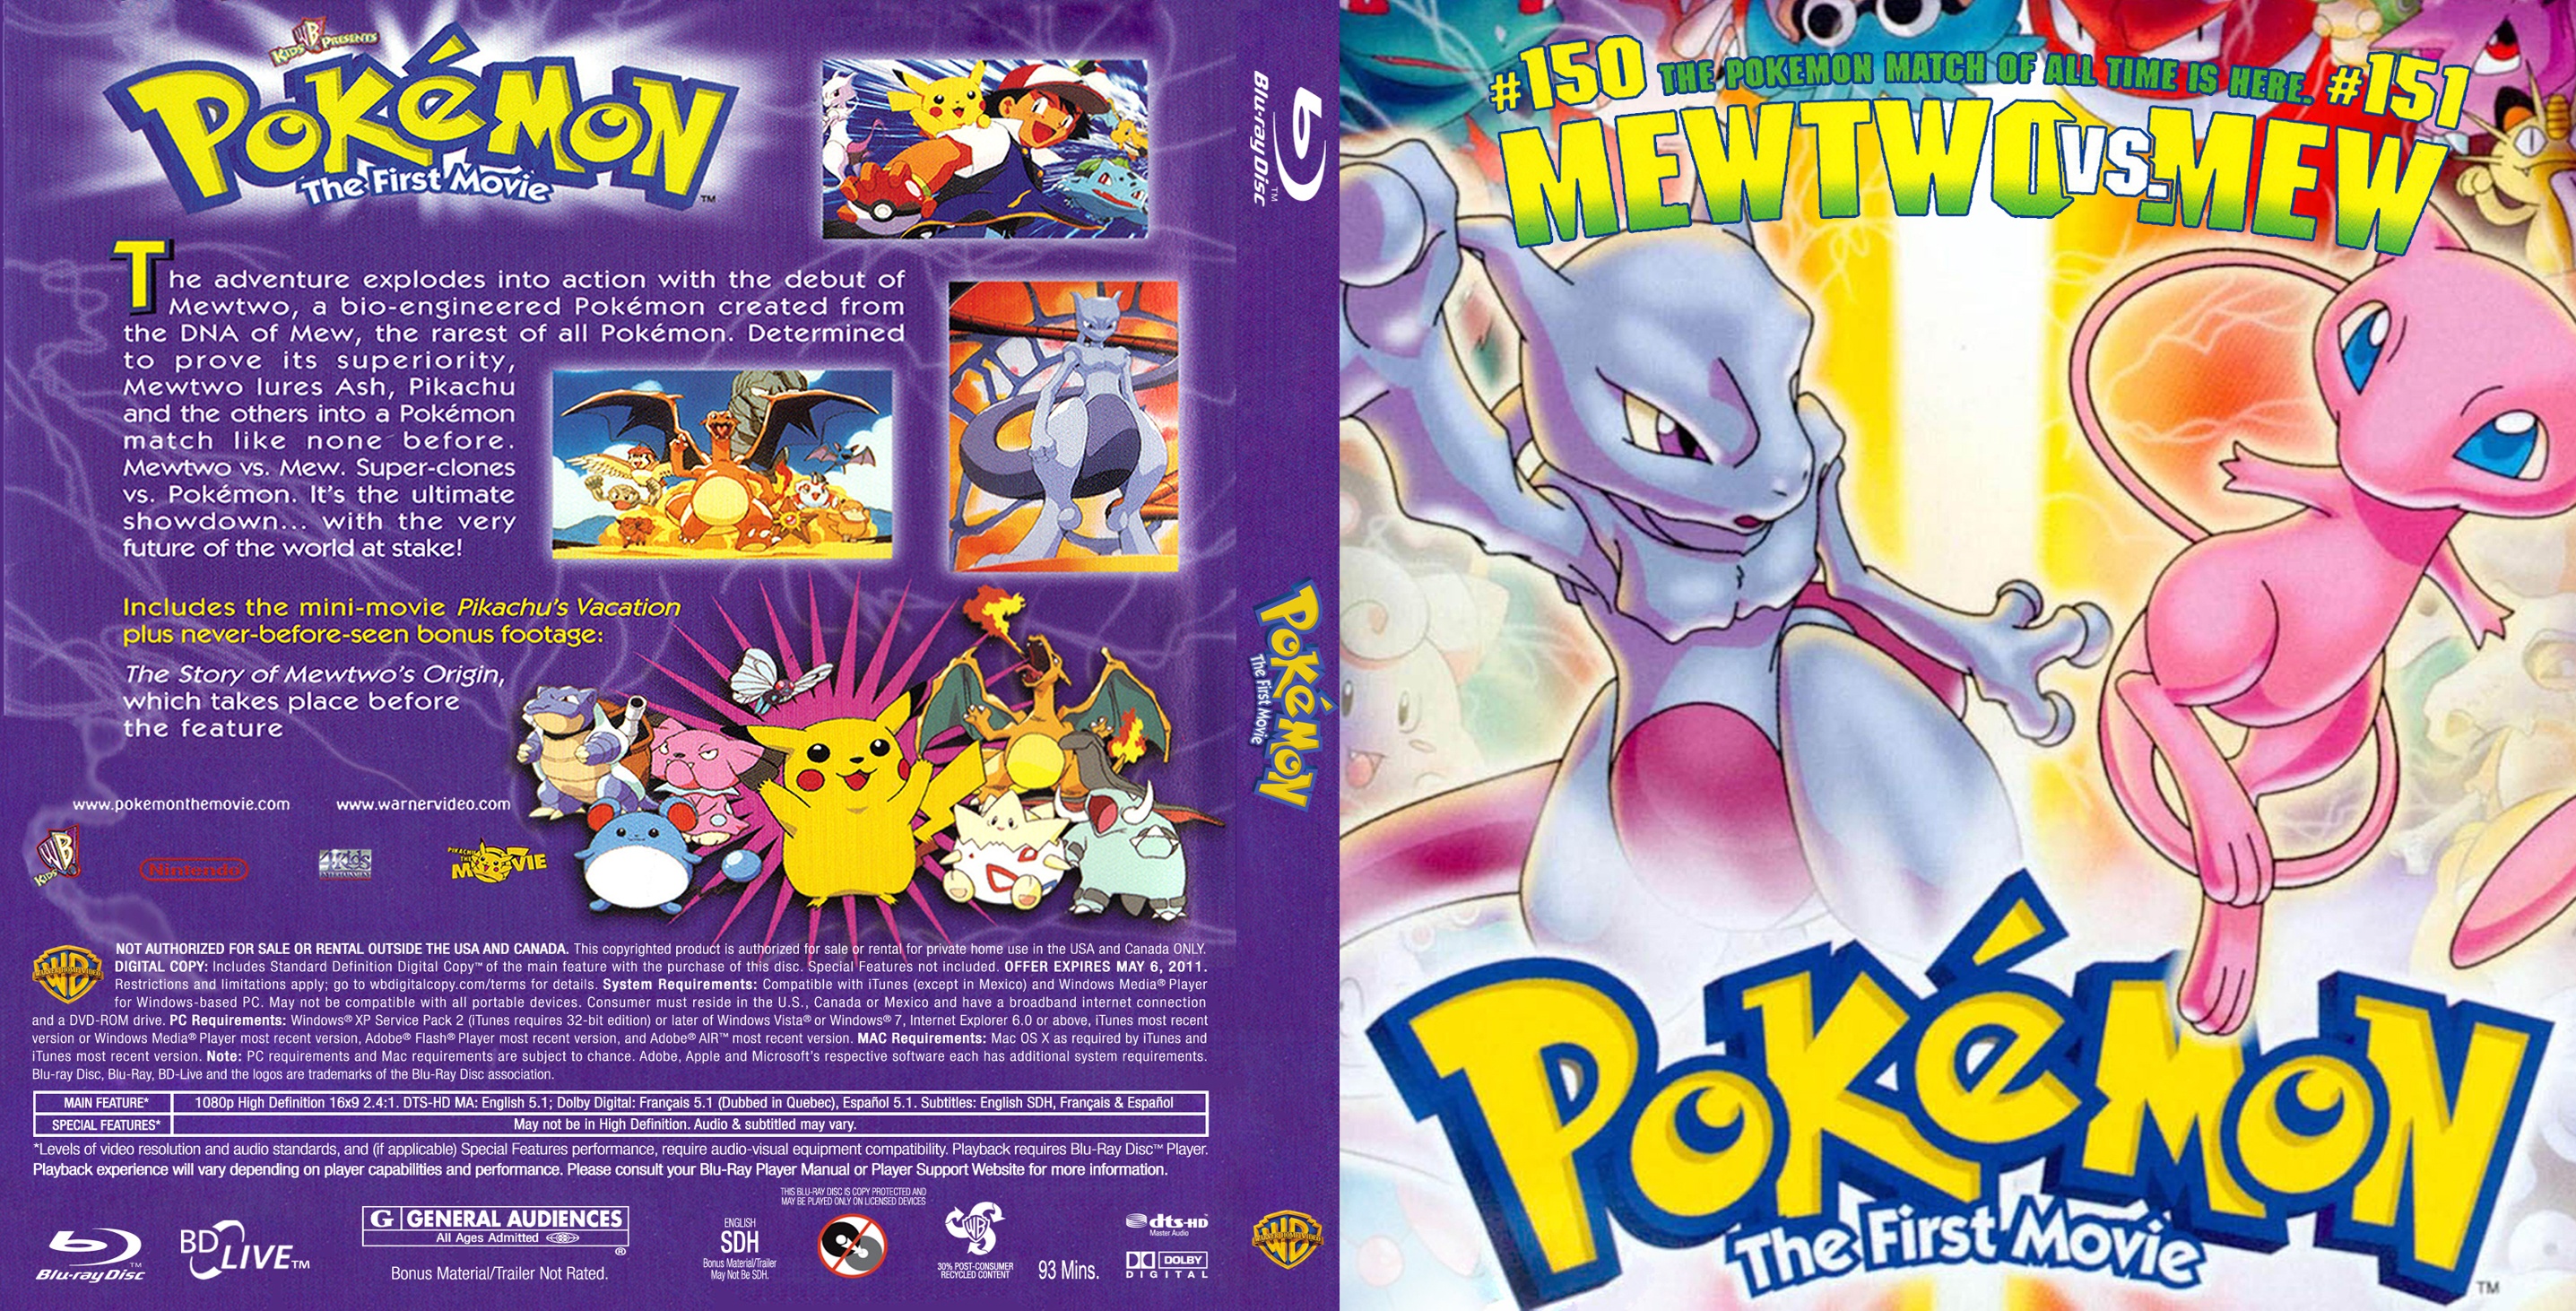 Pokemon: The First Movie Blu-ray box cover